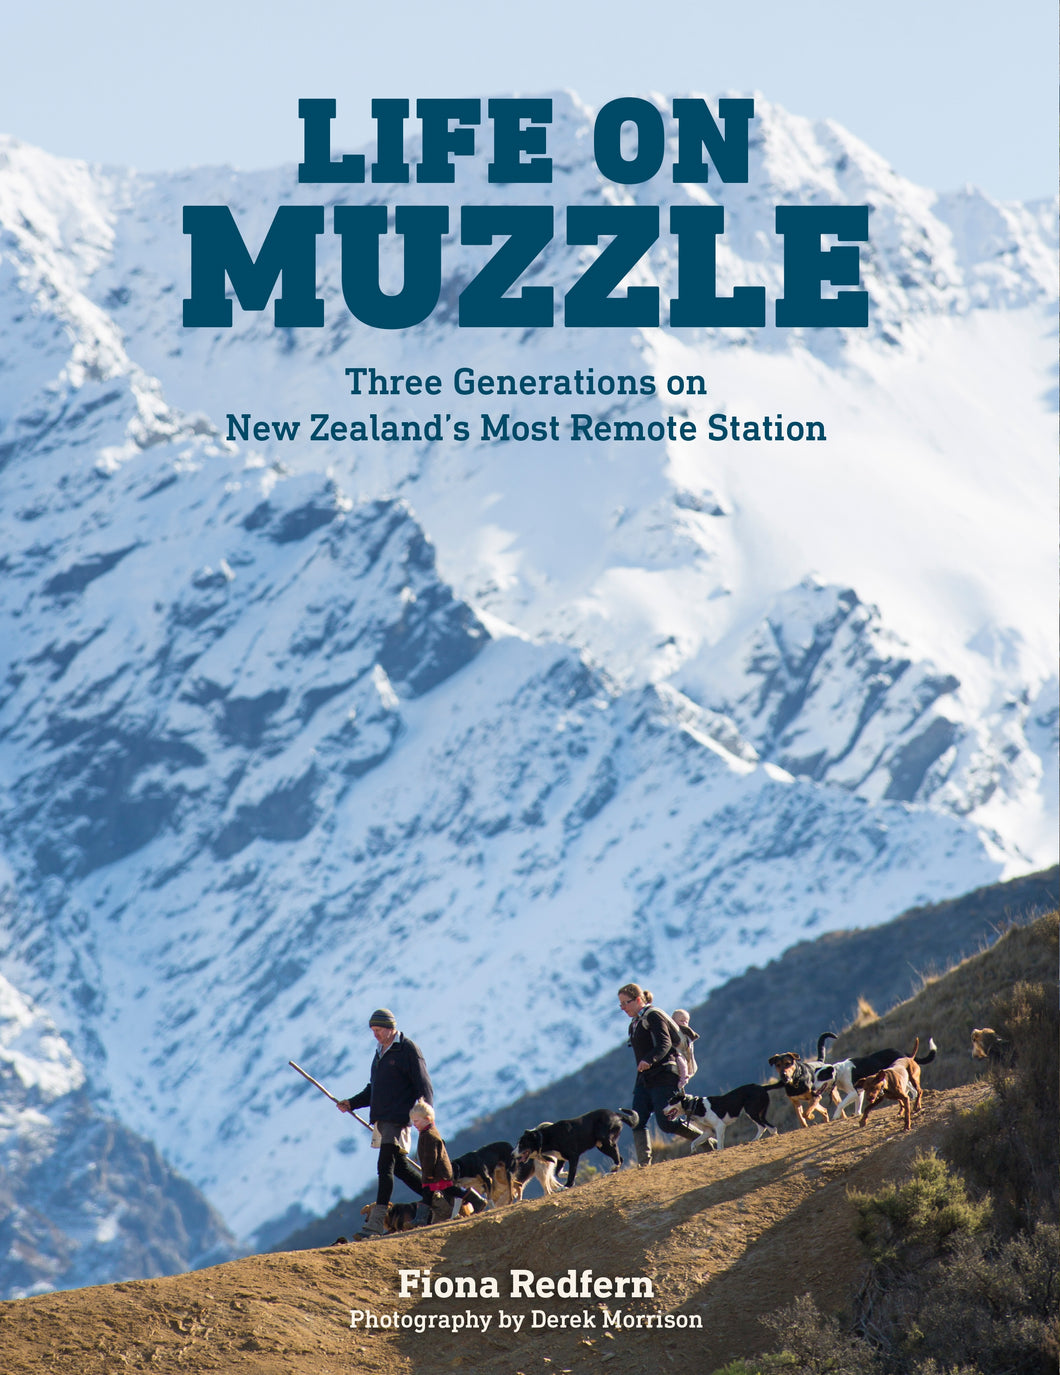 Life on Muzzle. Three Generations on New Zealand's Most Remote Station